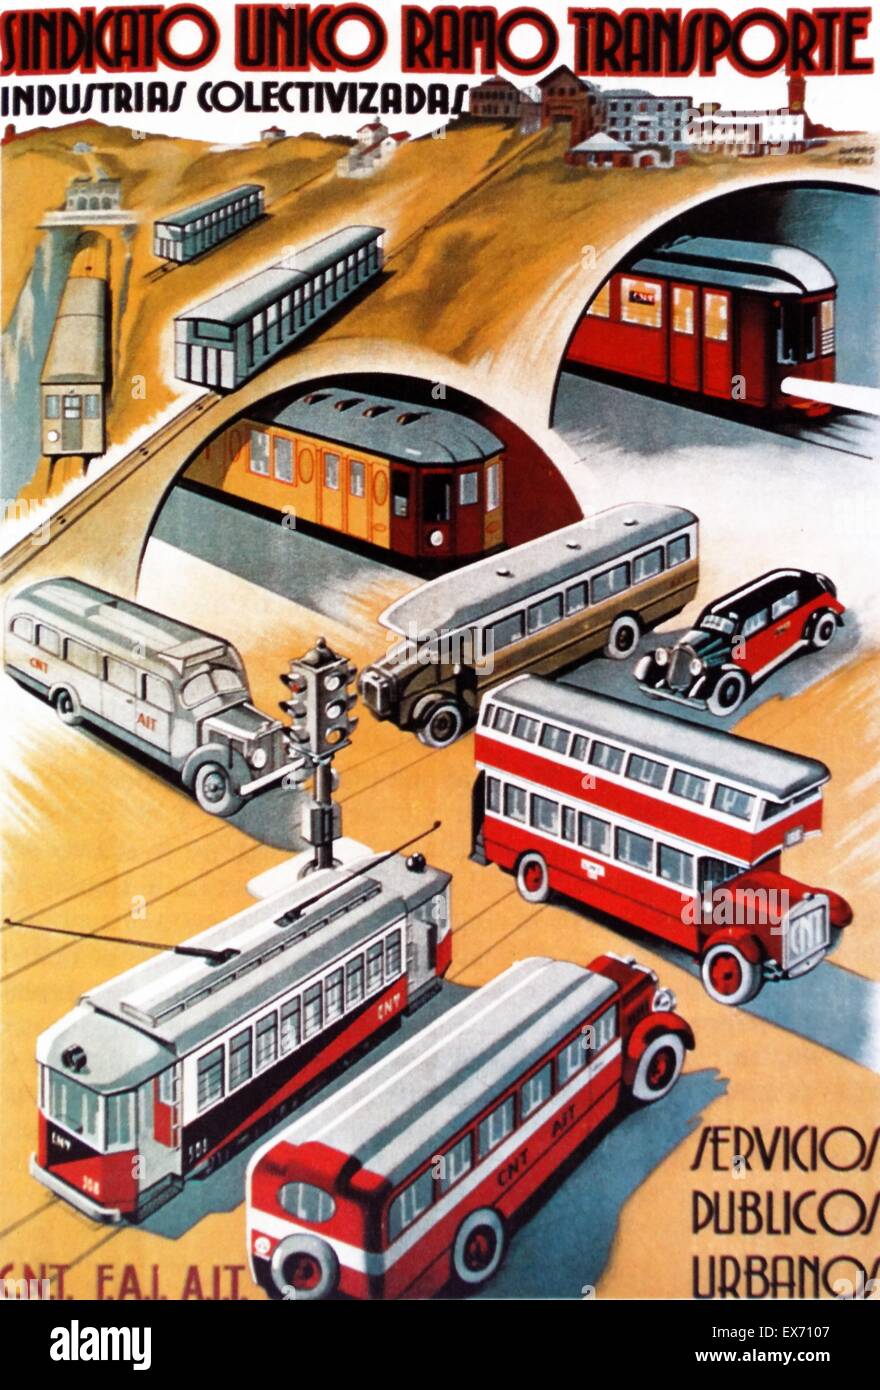 Propaganda poster by Ricard Obiols, from the Second Spanish Republic: Sindicato Unico Ramo Transporte. Extolling the achievements of the publicly run transport system. Stock Photo